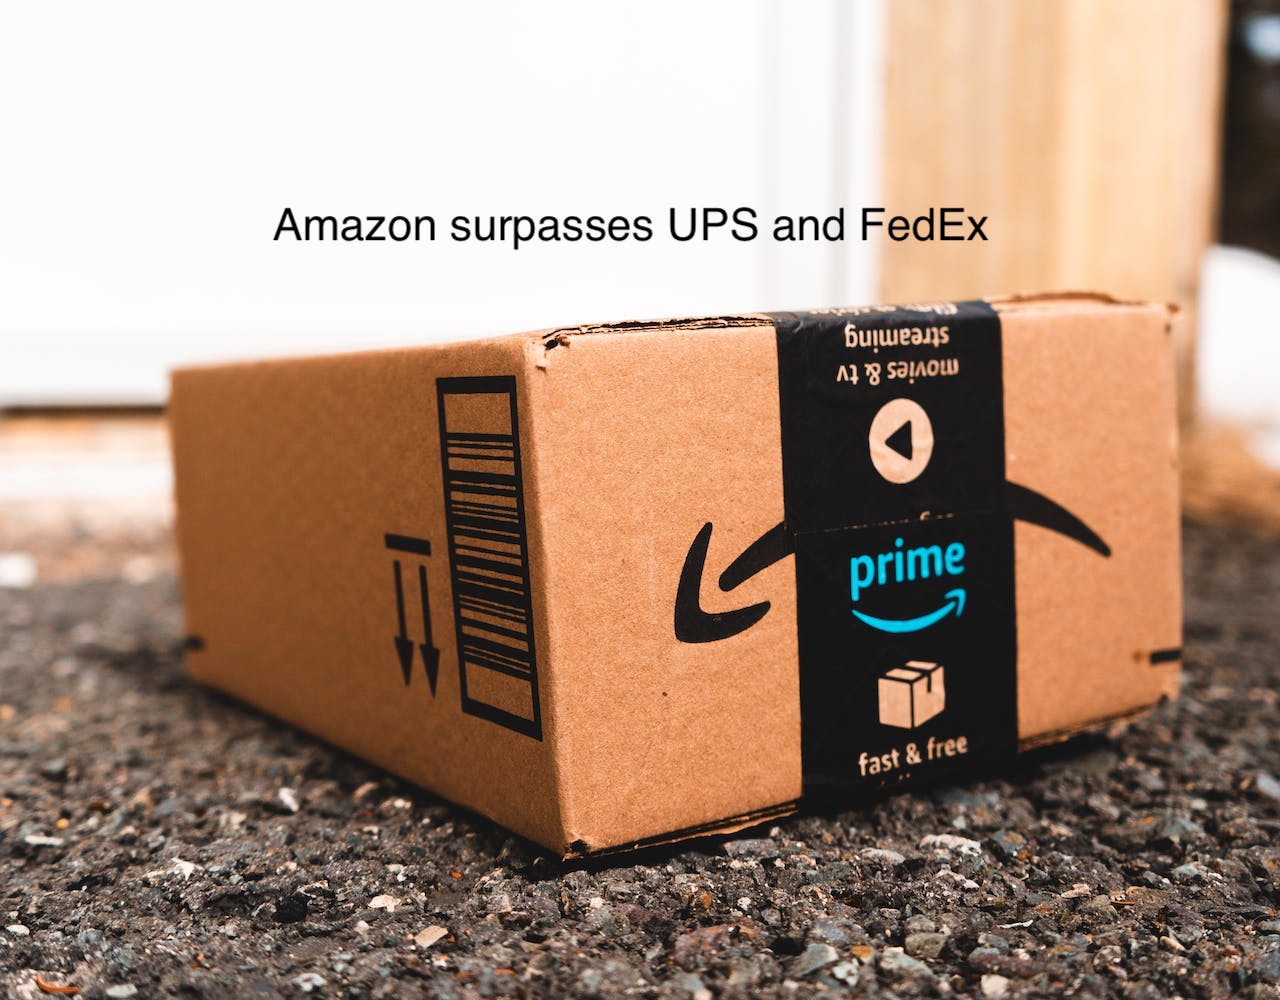 Amazon Breaks Records with Lightning-Fast Deliveries How Quick Can Your Next Package Arrive